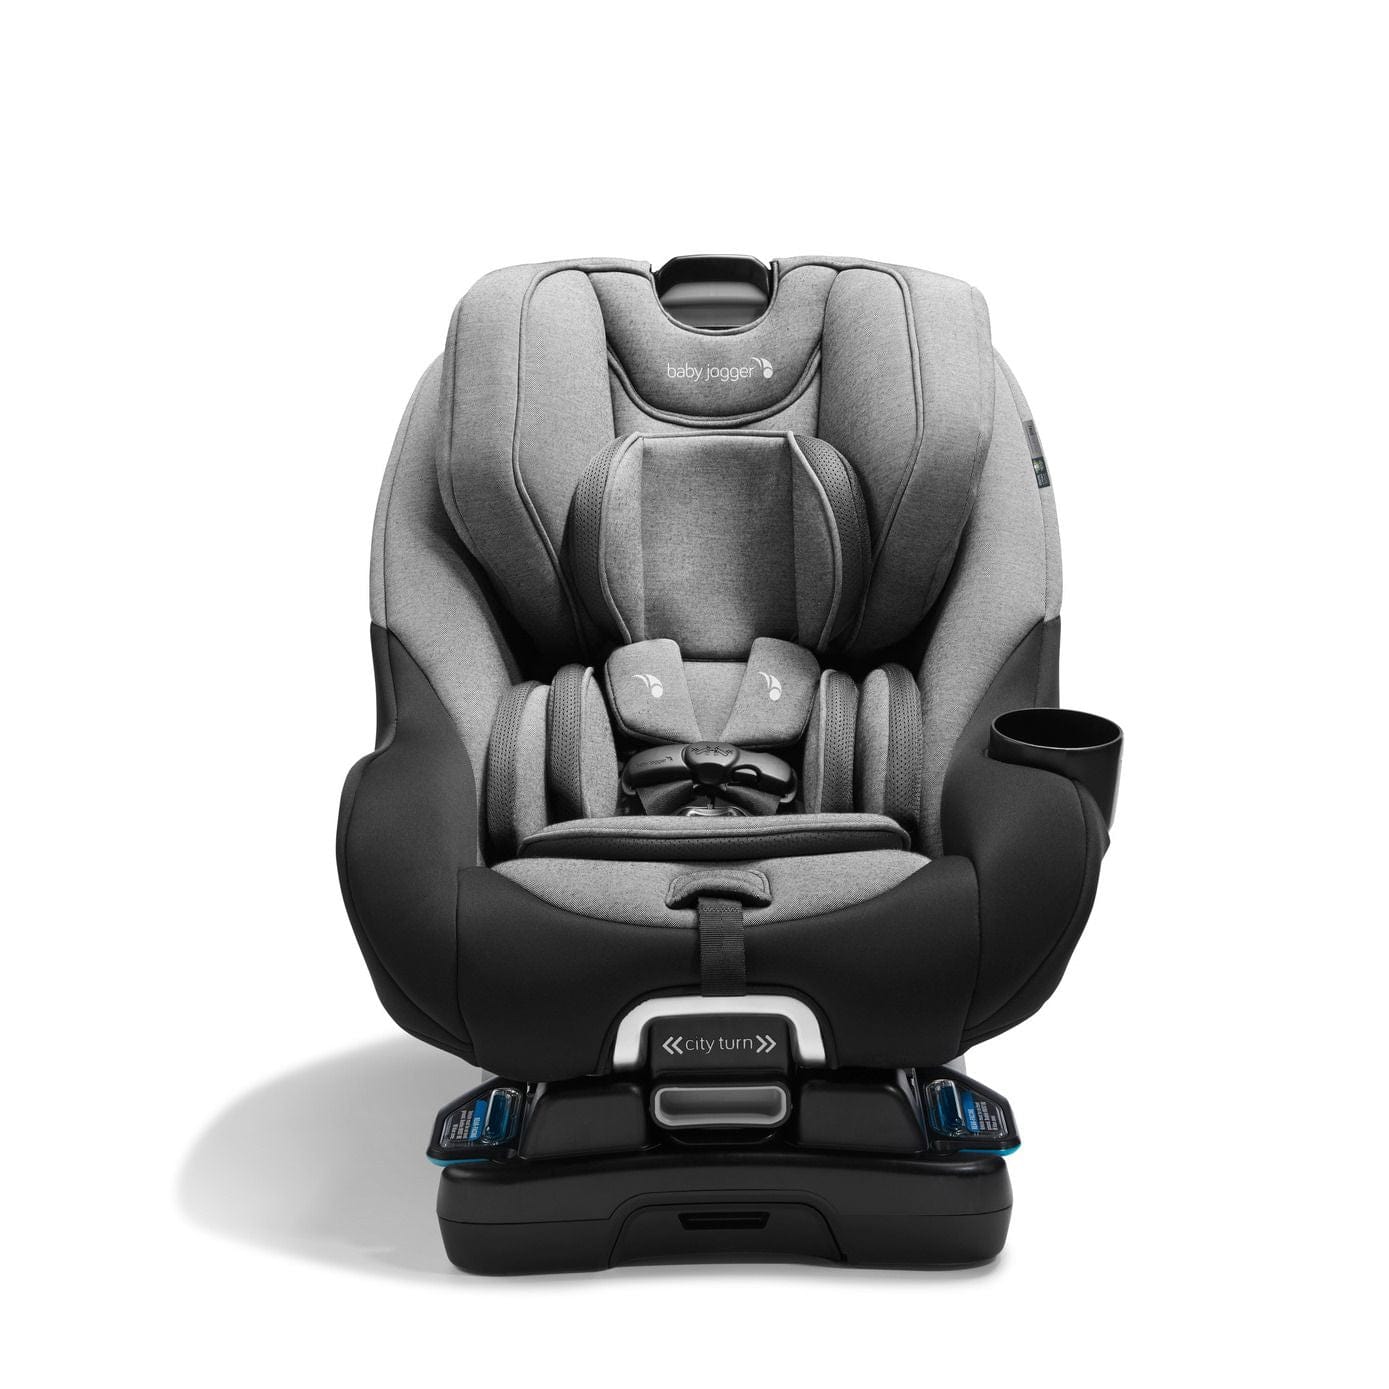 Baby Jogger Baby Accessory City Turn Convertible Car Seat - Onyx Black